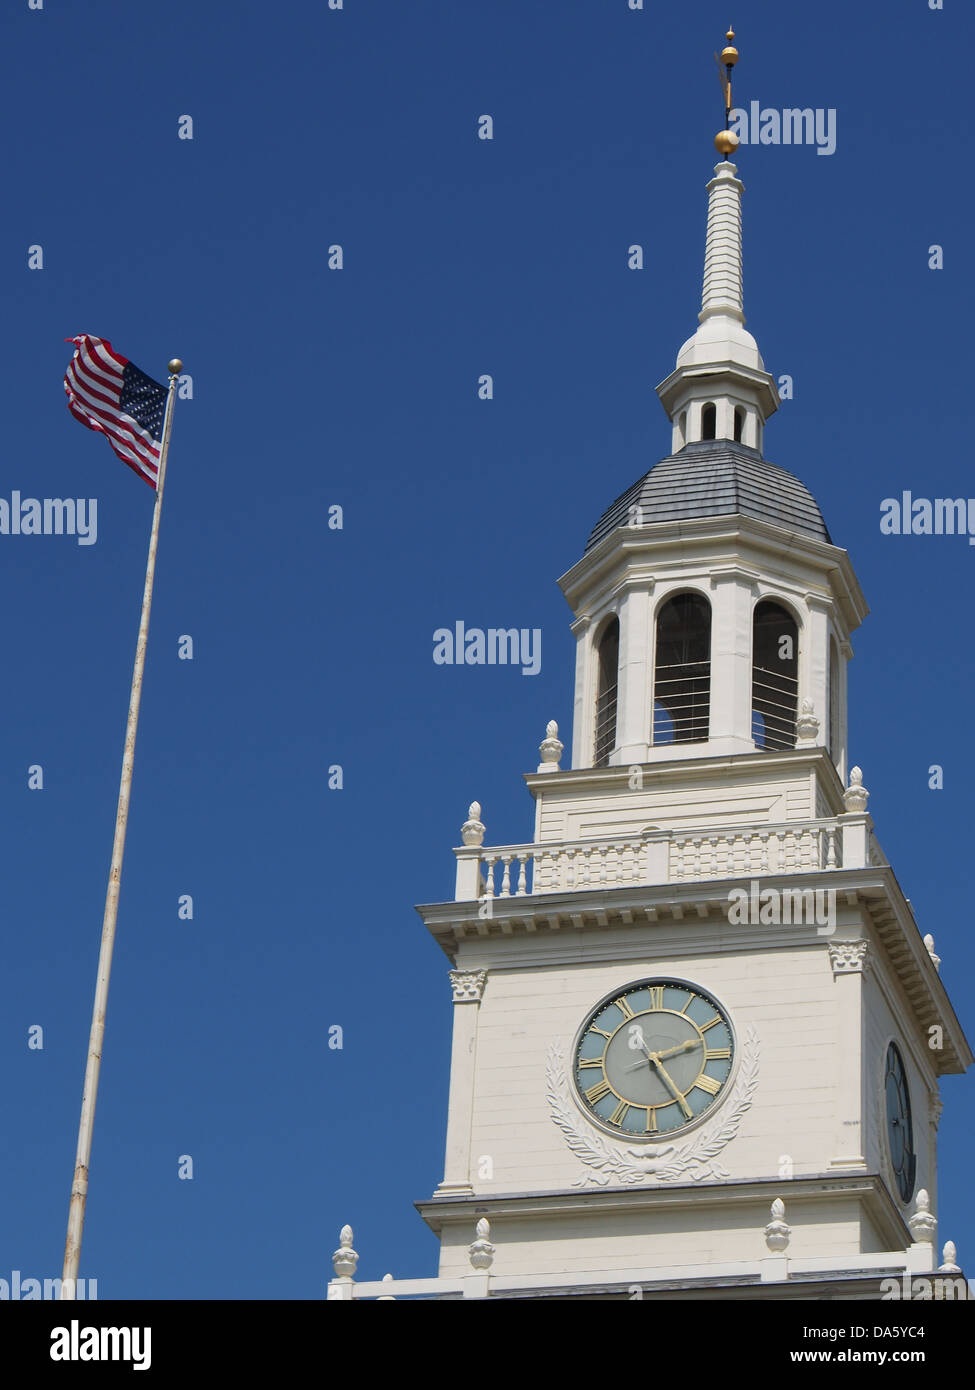 American flag blows in the wind in front of a town square clock tower Stock Photo